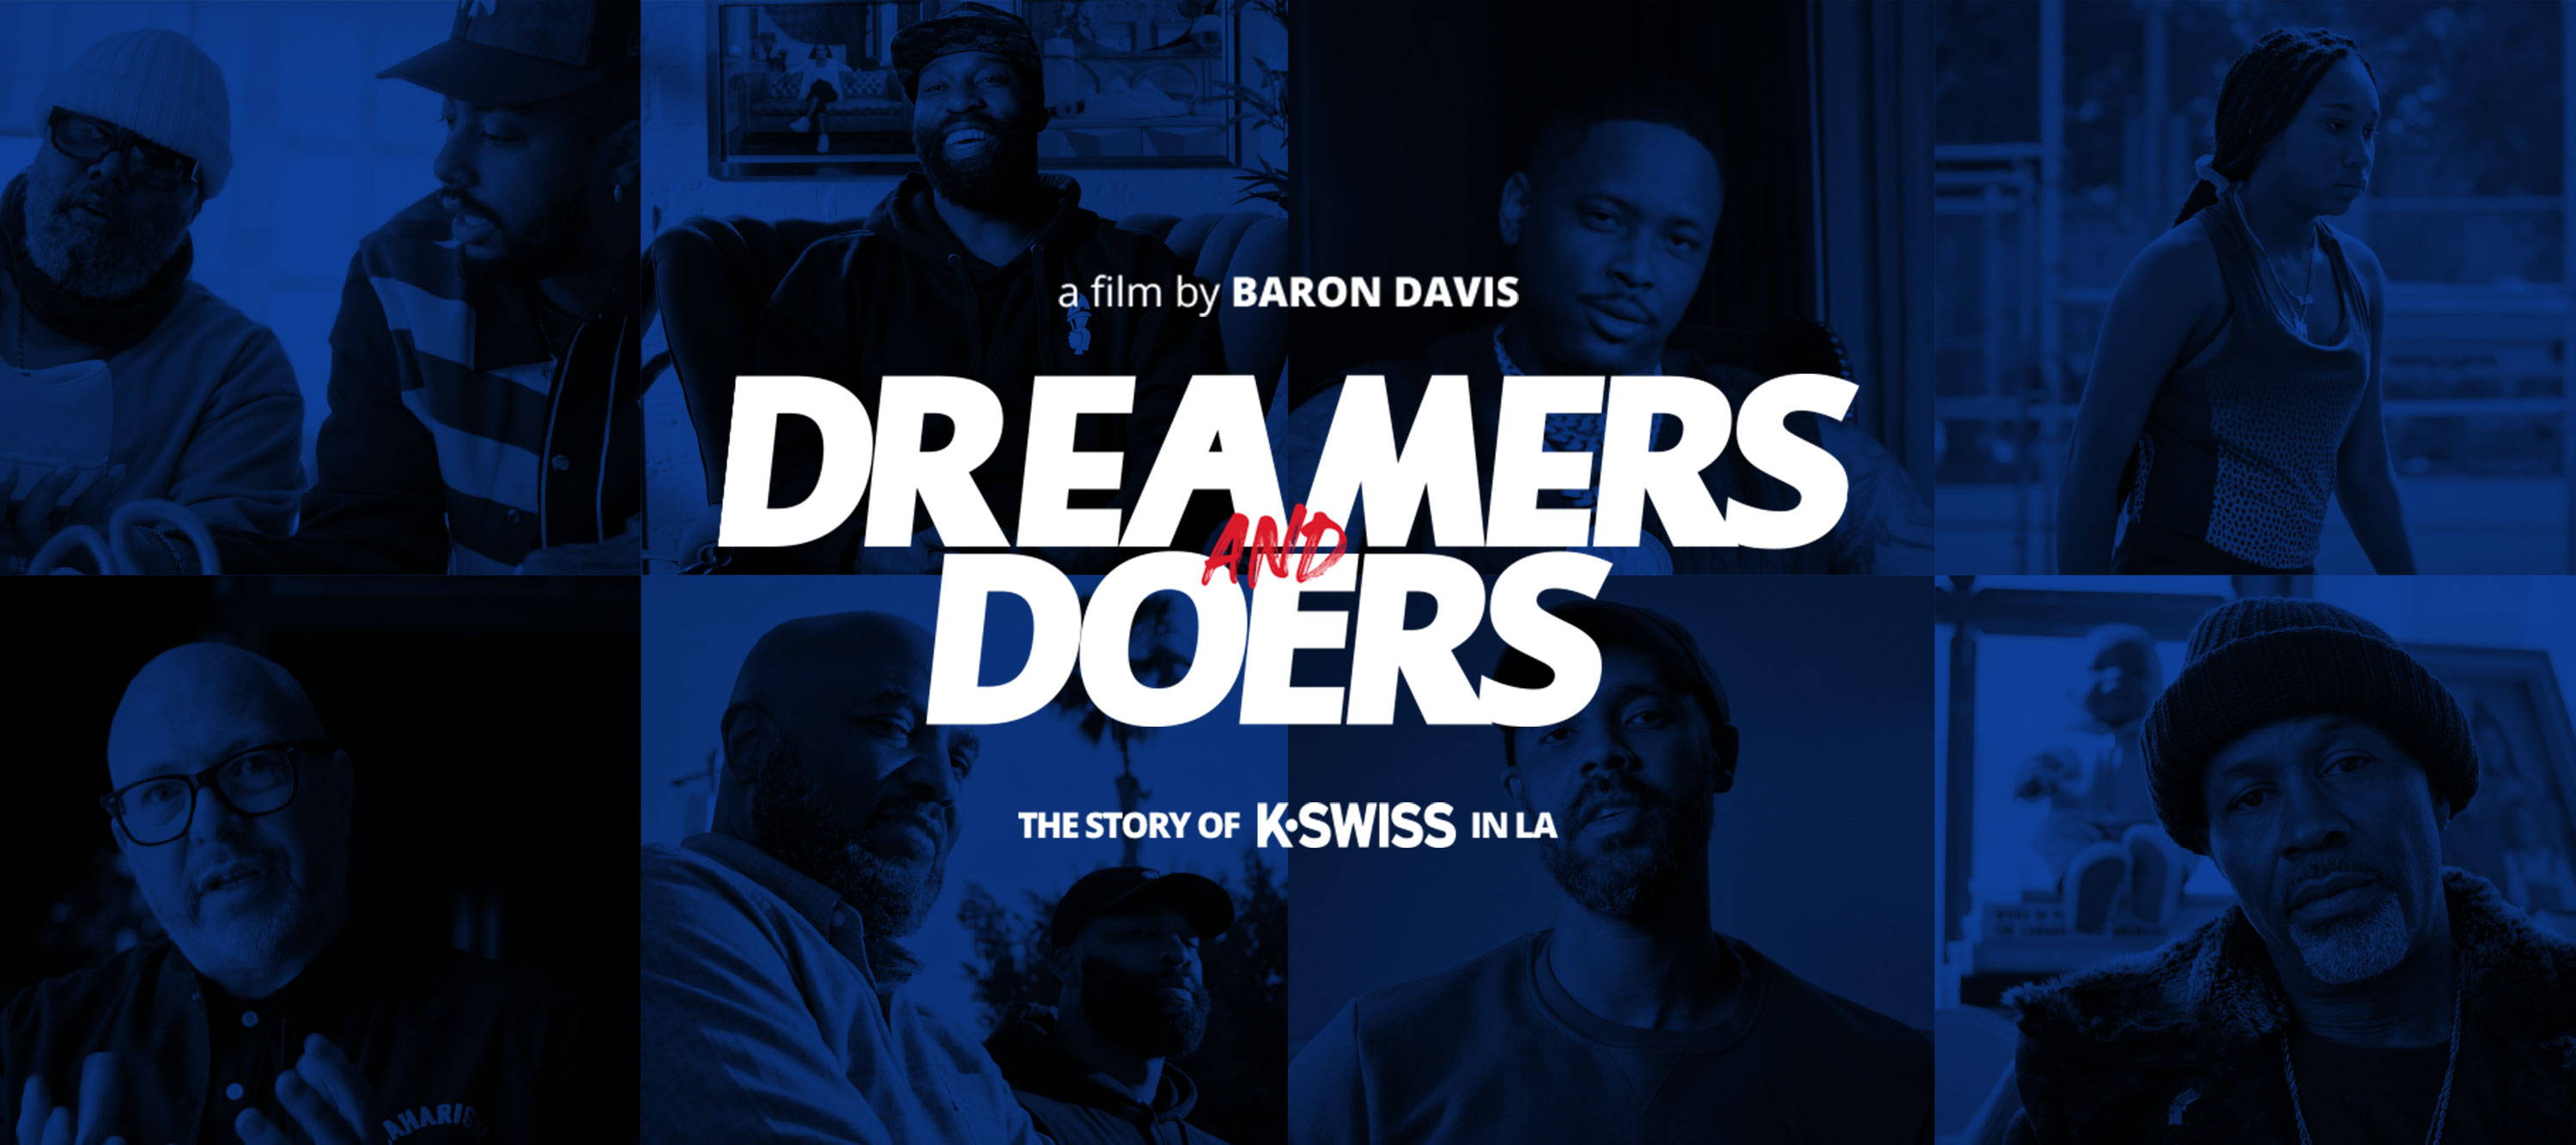 A Film by Baron Davis. Dreamers and Doers. The story of K-Swiss in LA